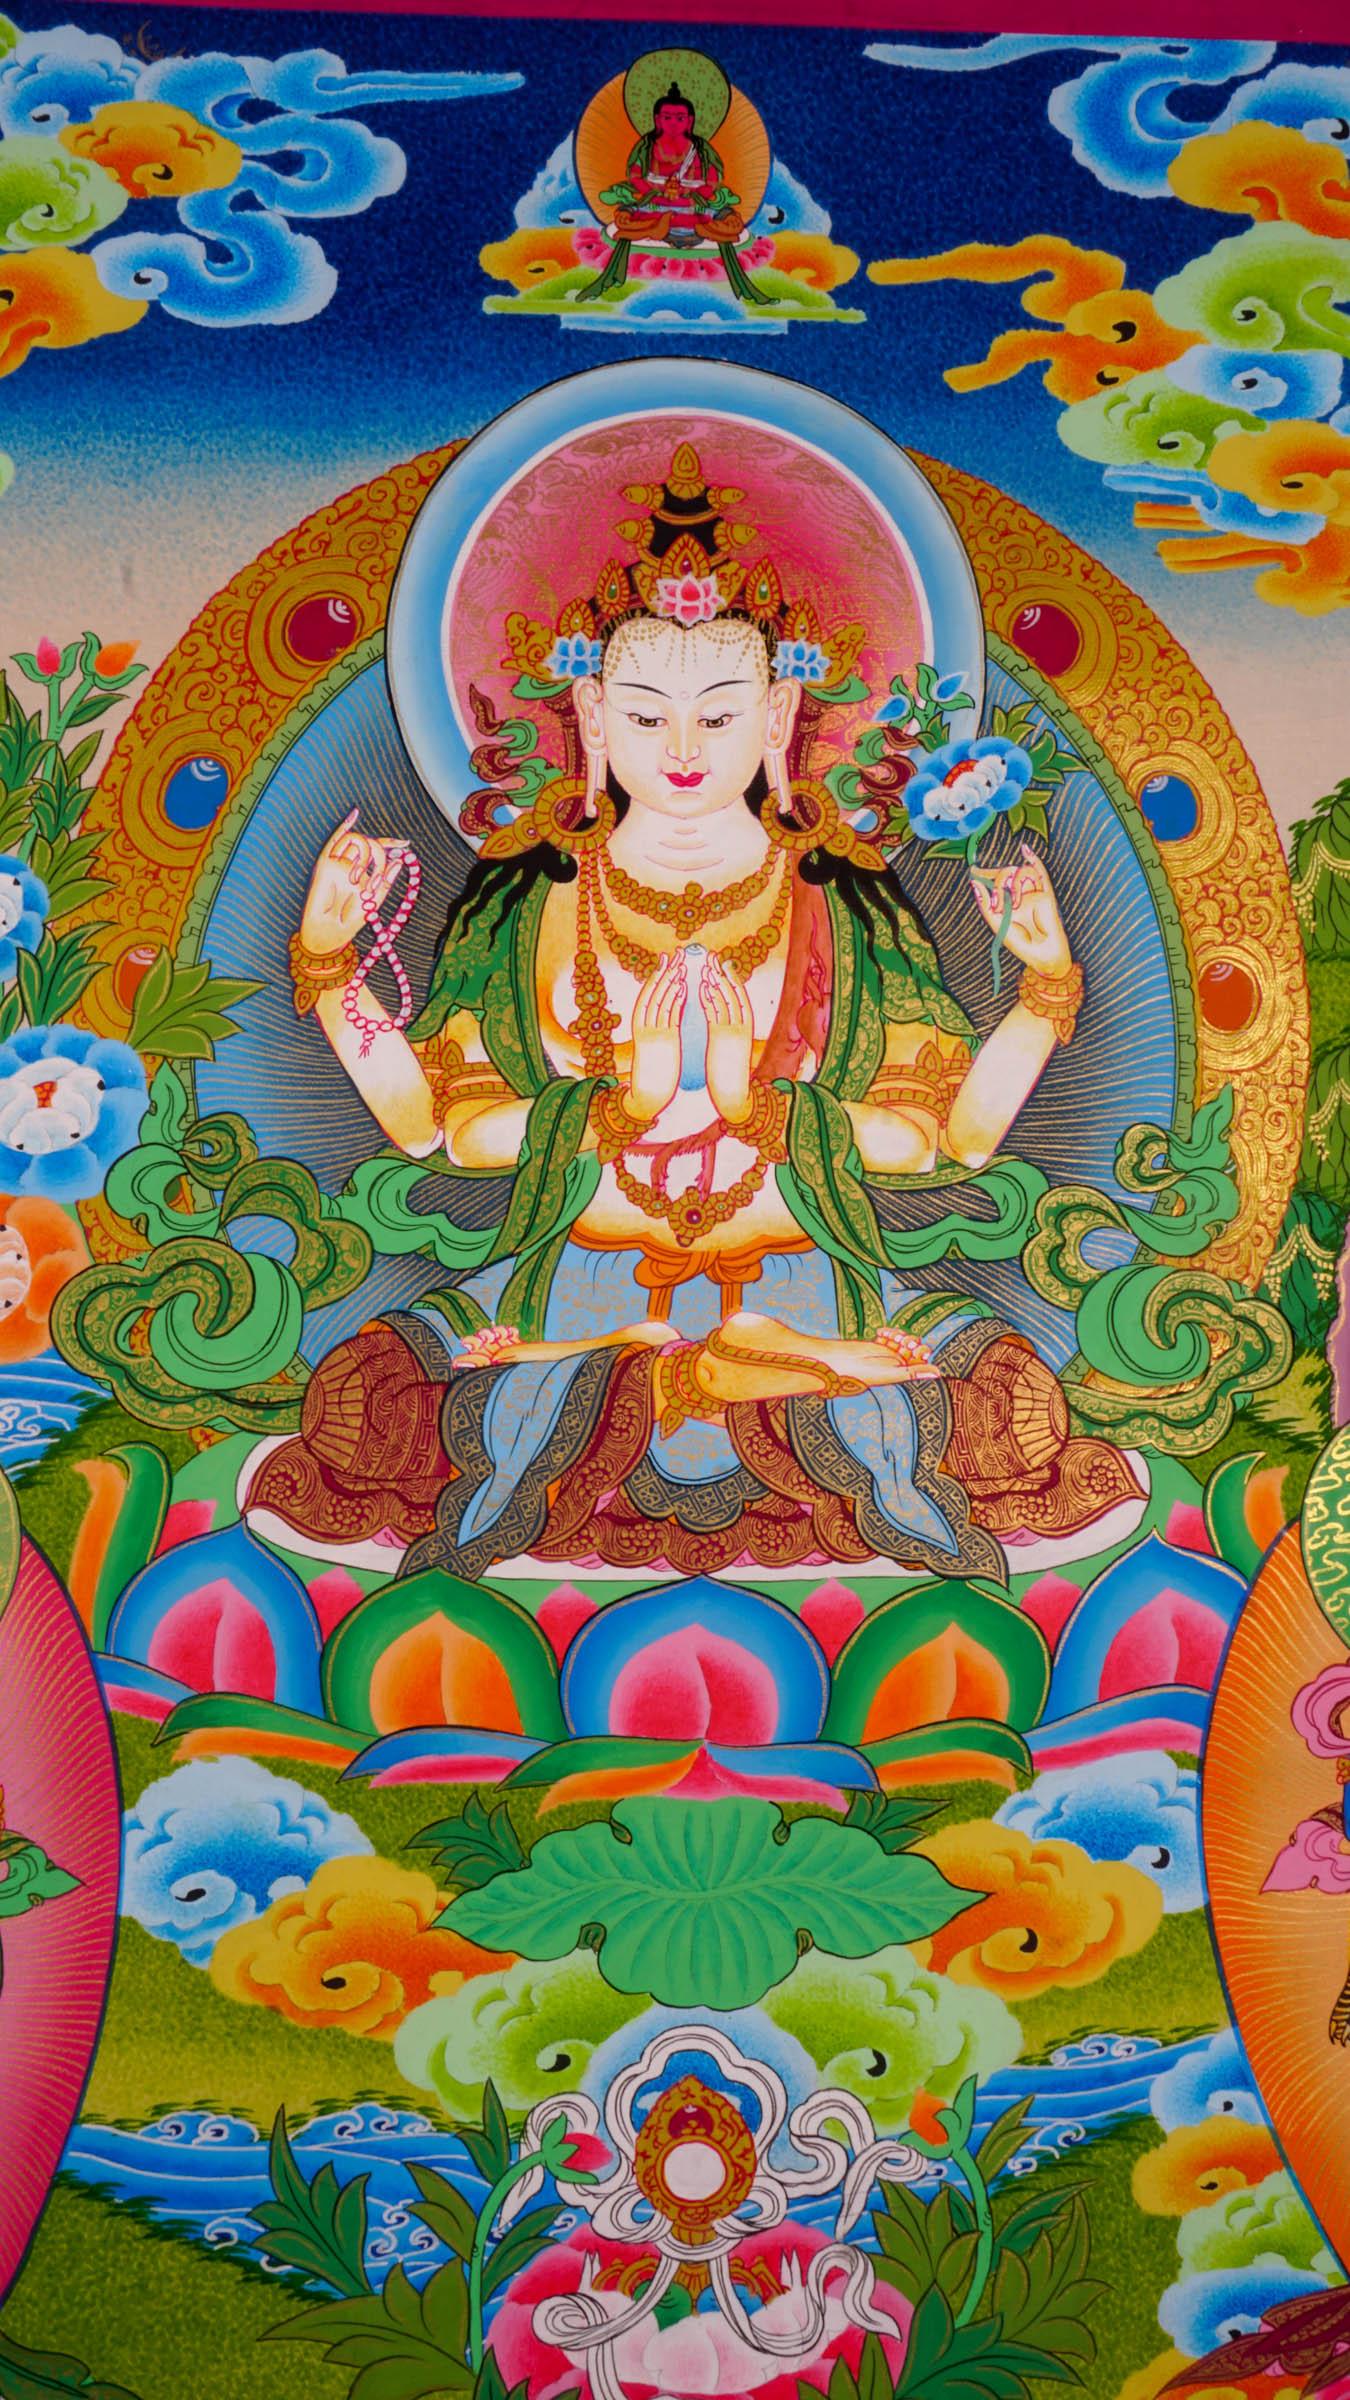 Chenrezig Thangka Painting with two deities